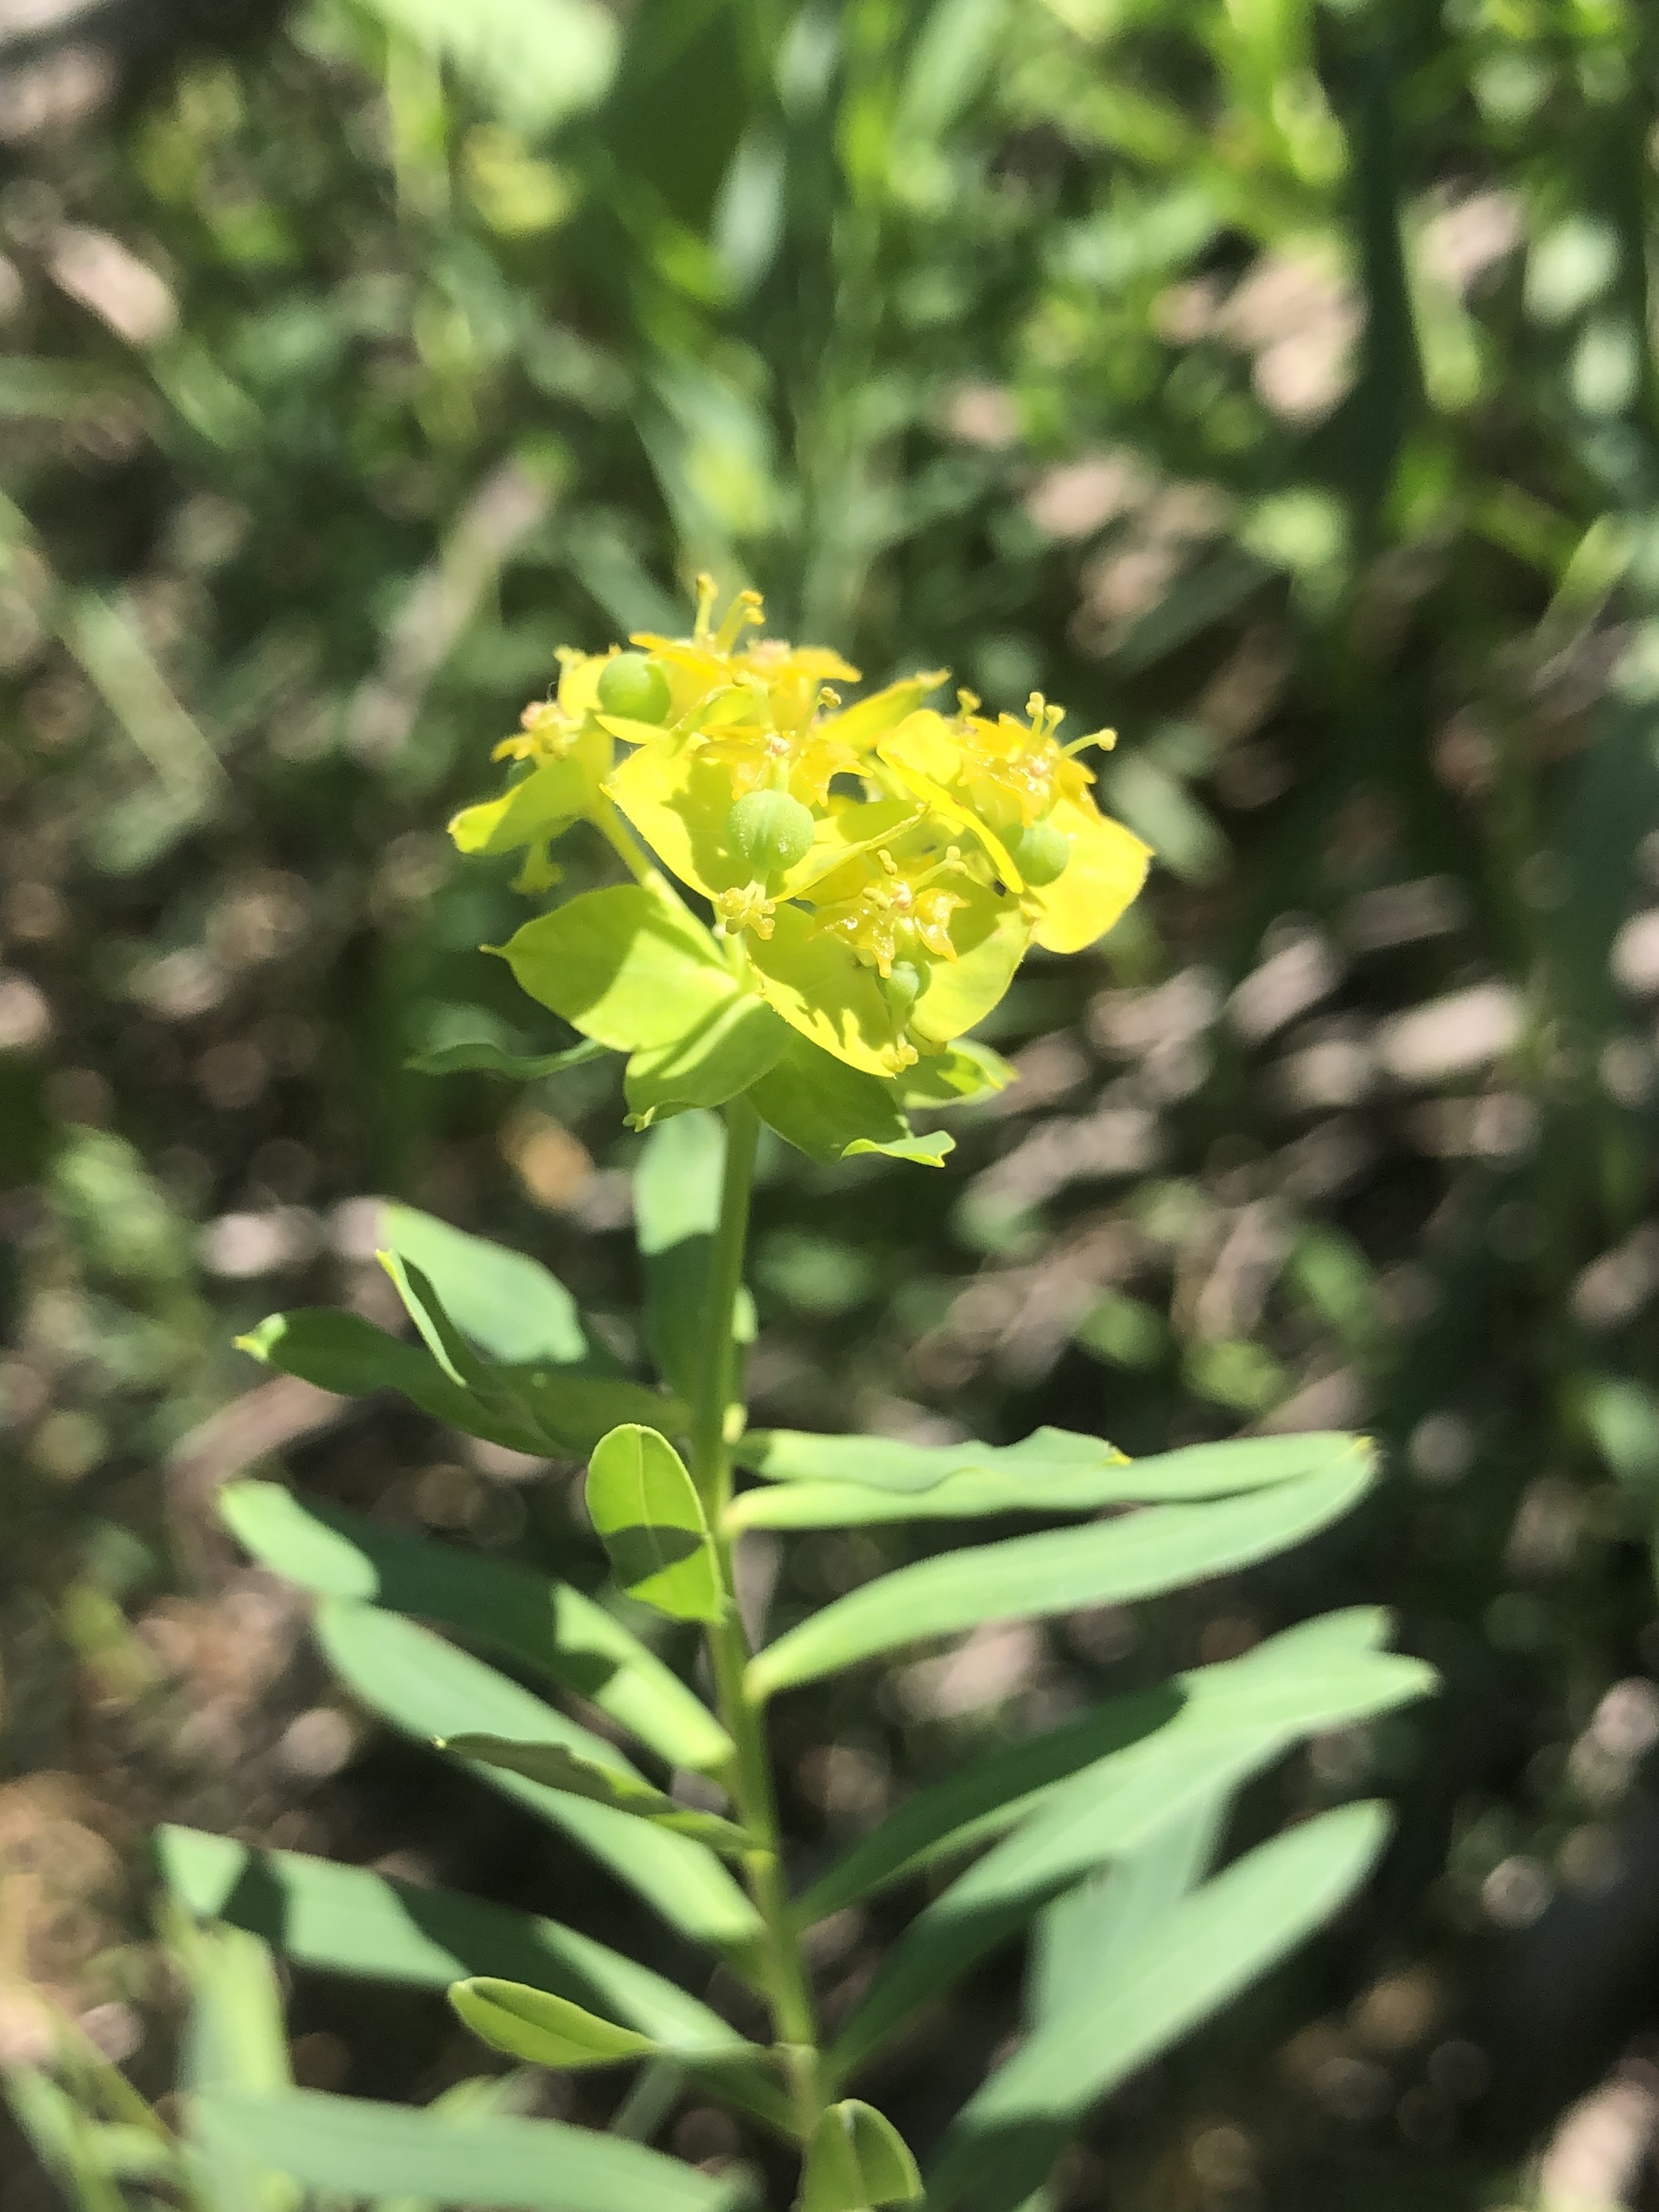 Leafy Spurge around Marion Dunn Pond in Madison, Wisconsin on June 21, 2021.